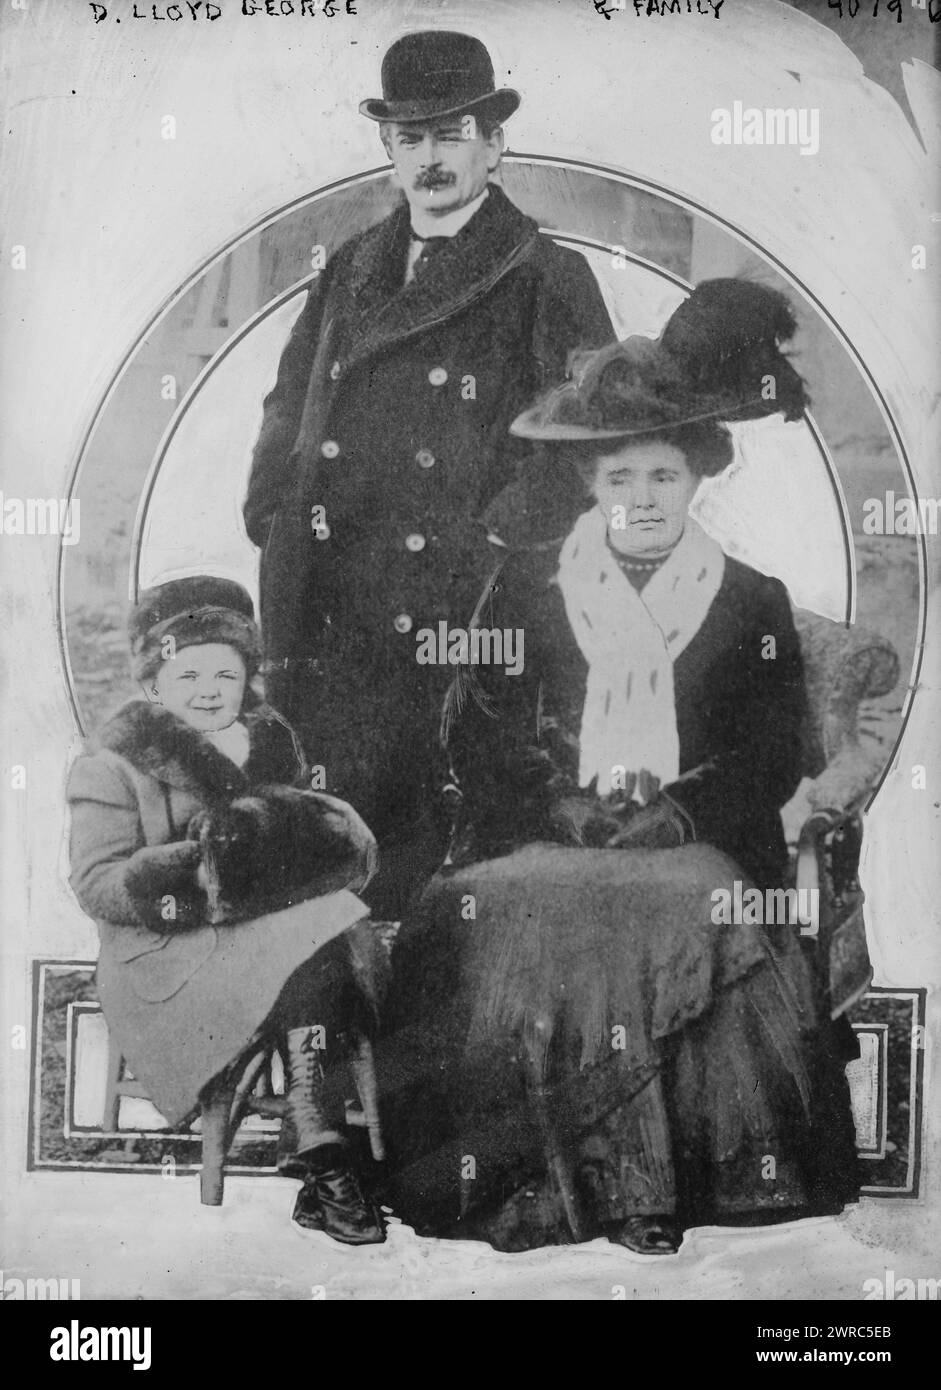 D. Lloyd George and family, Photograph shows British Liberal Party statesman David Lloyd George, 1st Earl Lloyd-George of Dwyfor (1863-1945) who served as Prime Minister from 1916-1922. With him are his wife Dame Margaret Lloyd George (1866-1941) and daughter Megan., between ca. 1915 and 1920, Glass negatives, 1 negative: glass Stock Photo